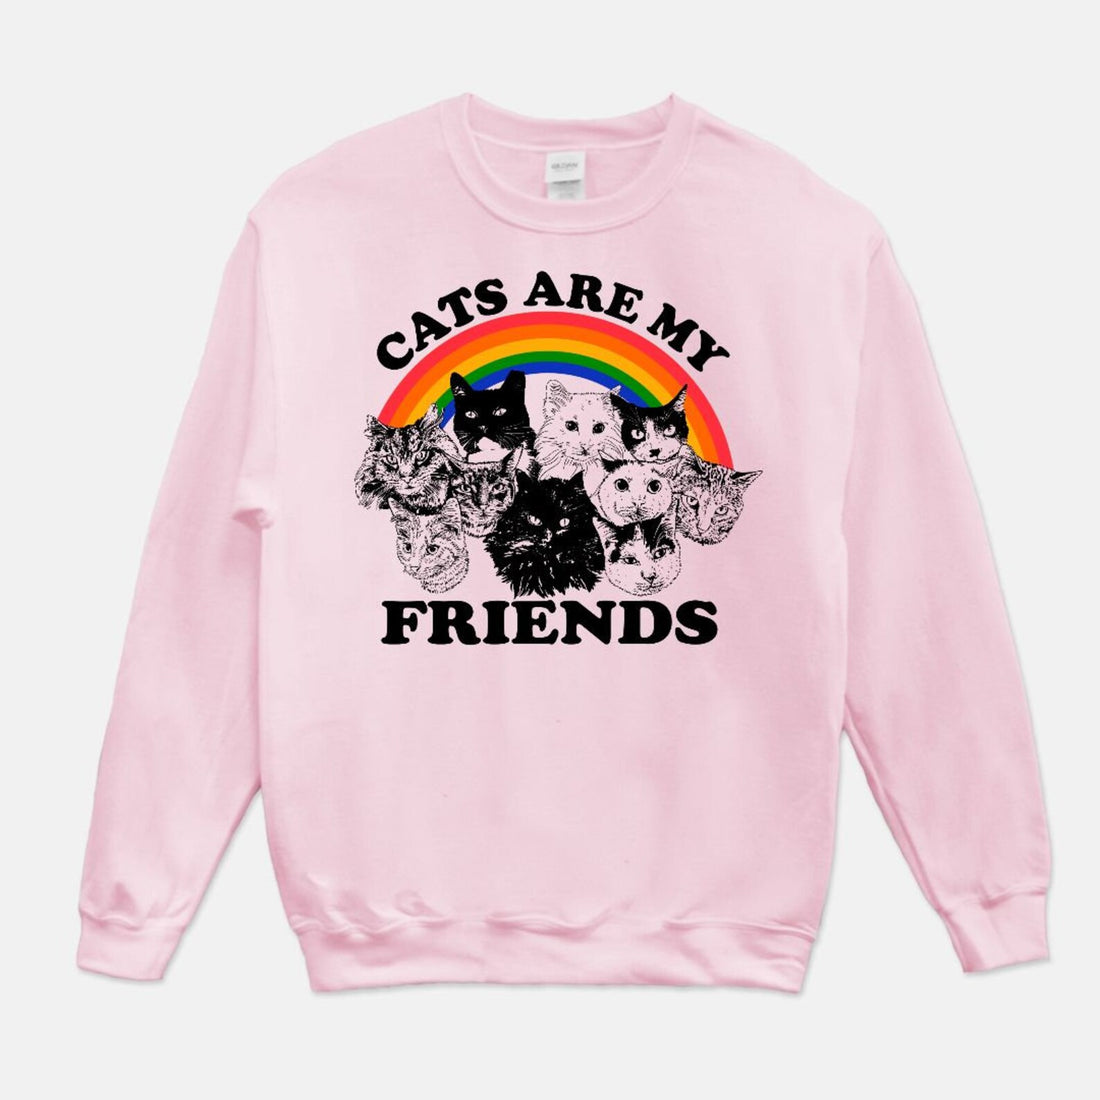 Cats Are My Friends Crewneck